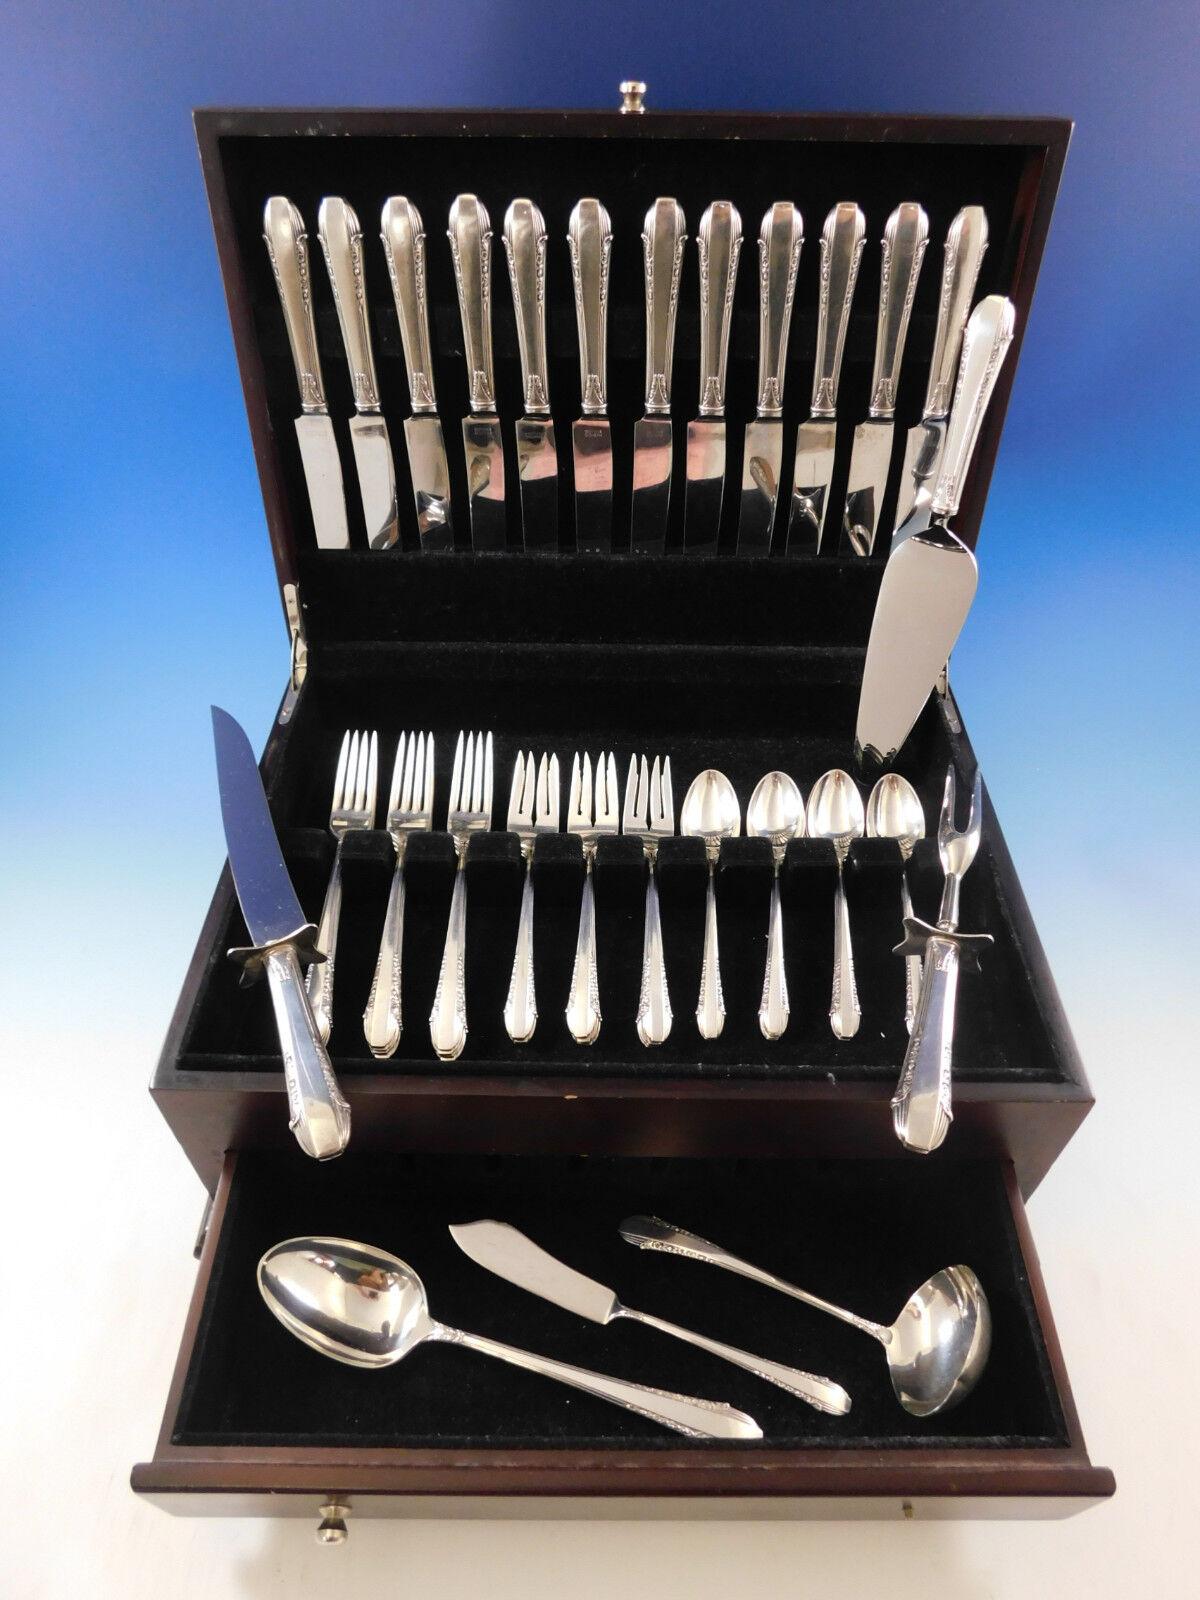 Exquisite Enchantress by International sterling silver Flatware set, 54 pieces. This set includes:

12 Knives, 9 1/4